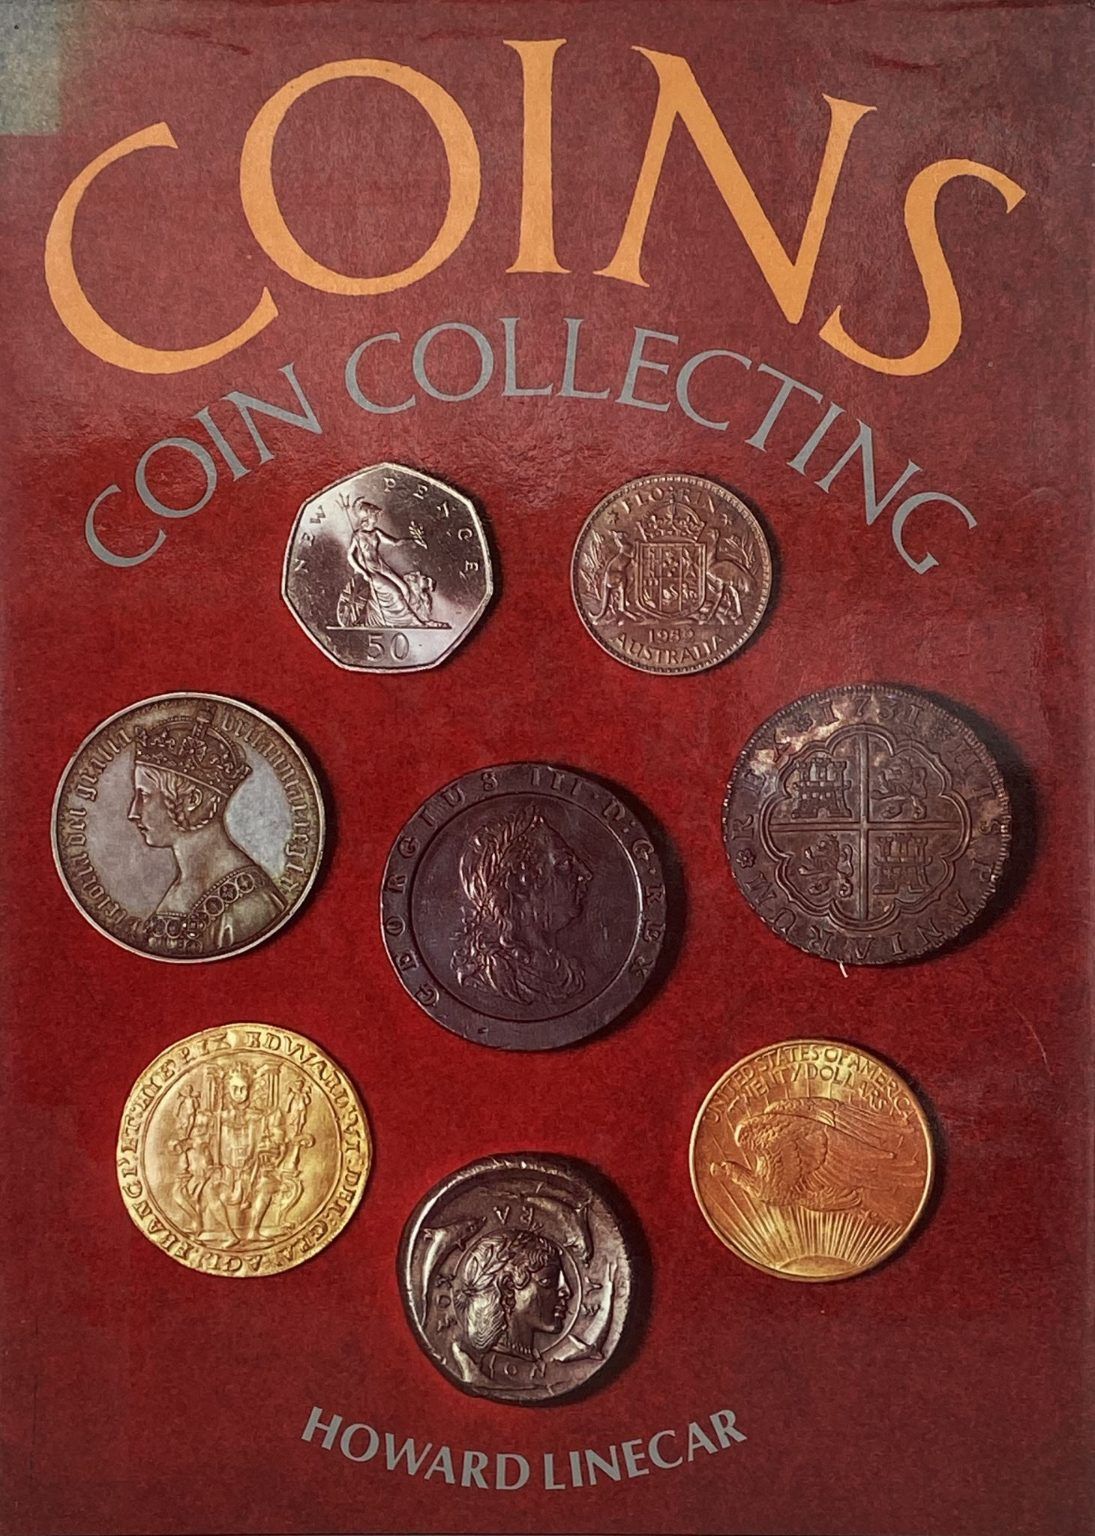 COINS AND COIN COLLECTING